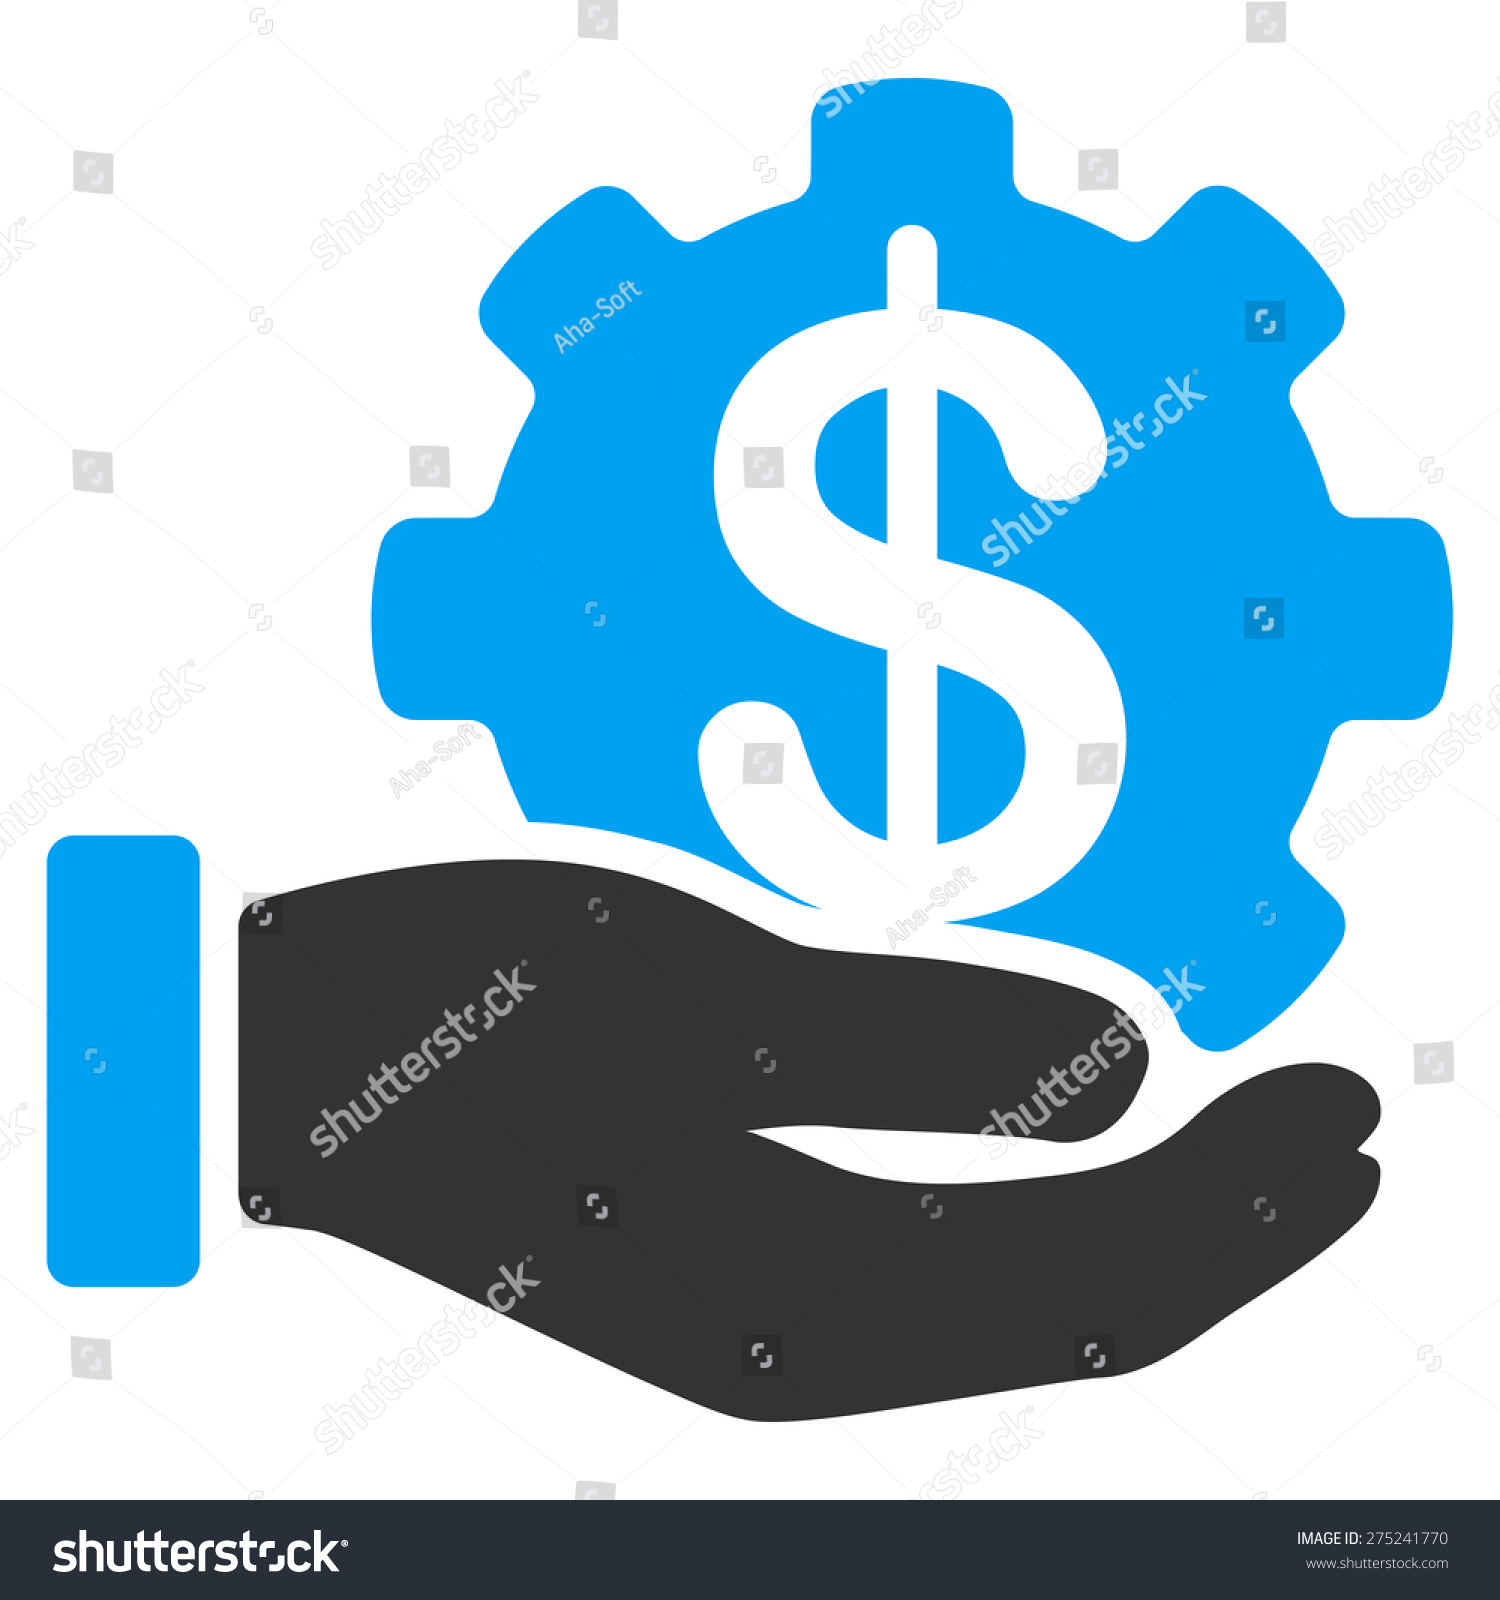 Royalty-free Payment service icon. This isolated #275241770 Stock 